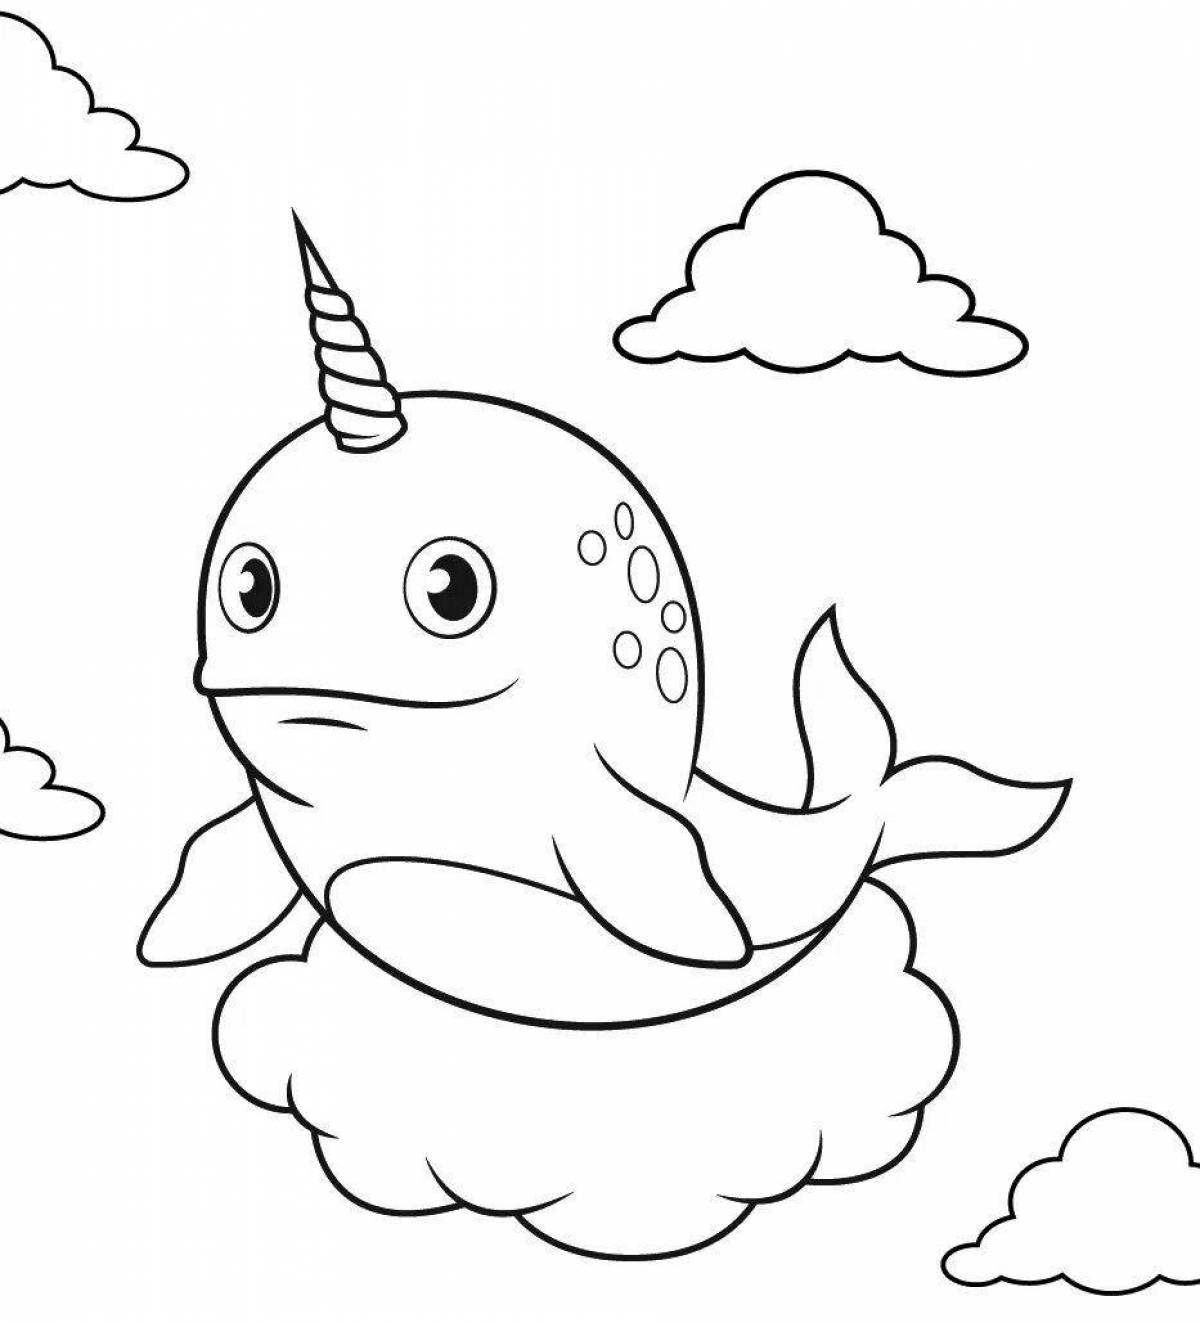 Amazing narwhal coloring book for kids